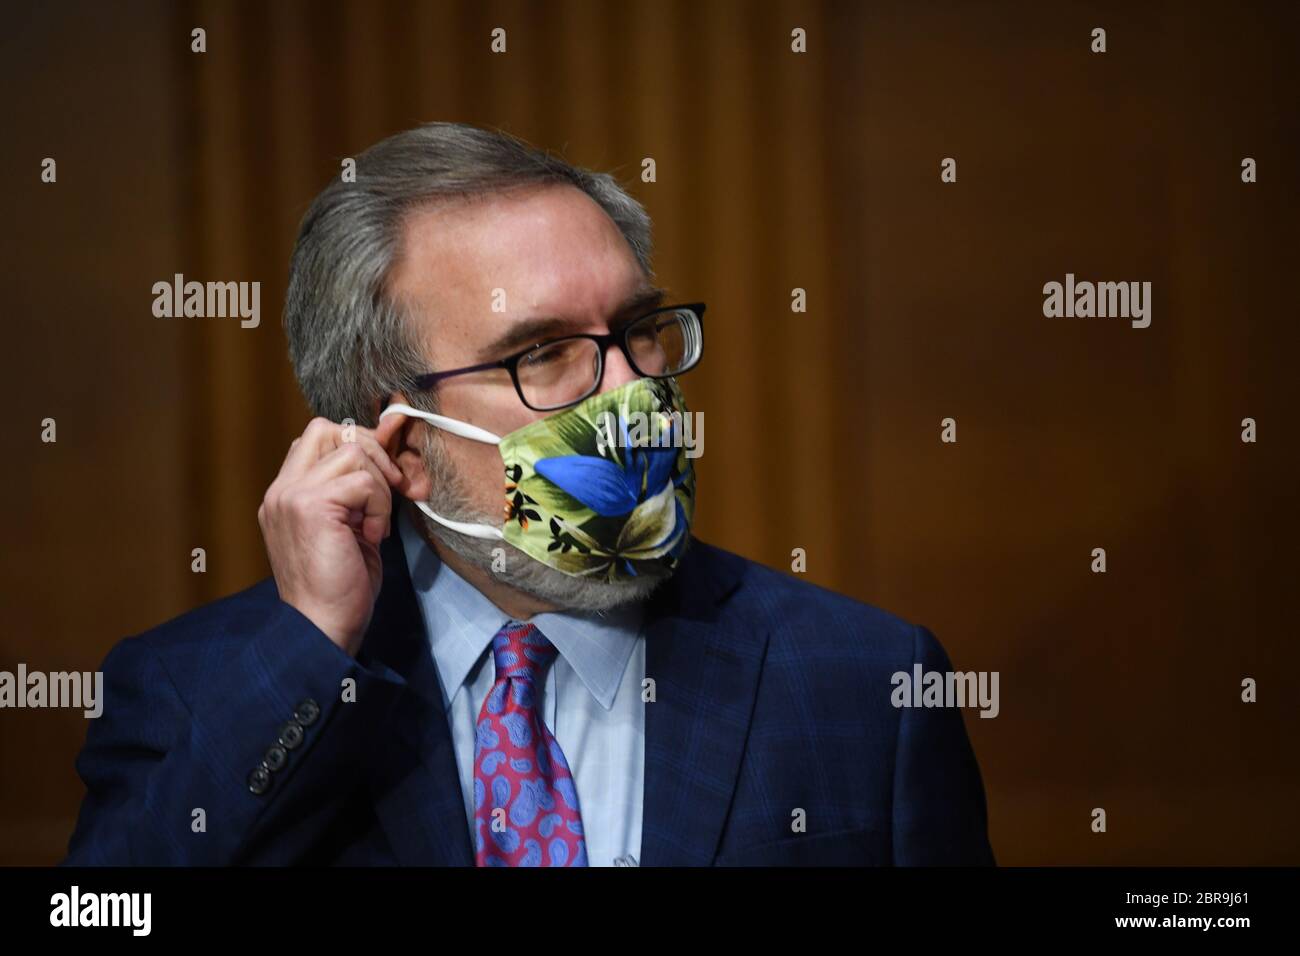 Washington, DC. 20th May, 2020. Andrew Wheeler, Administrator, United States Environmental Protection Agency (EPA) adjusts his mask at a hearing titled 'Oversight of the Environmental Protection Agency' in the Dirksen Senate Office Building on Wednesday, May 20, 2020 in Washington, DC. Wheeler will be asked about the rollback of regulations by the Environment Protection Agency since the pandemic started in March. Credit: Kevin Dietsch/Pool via CNP | usage worldwide Credit: dpa/Alamy Live News Stock Photo